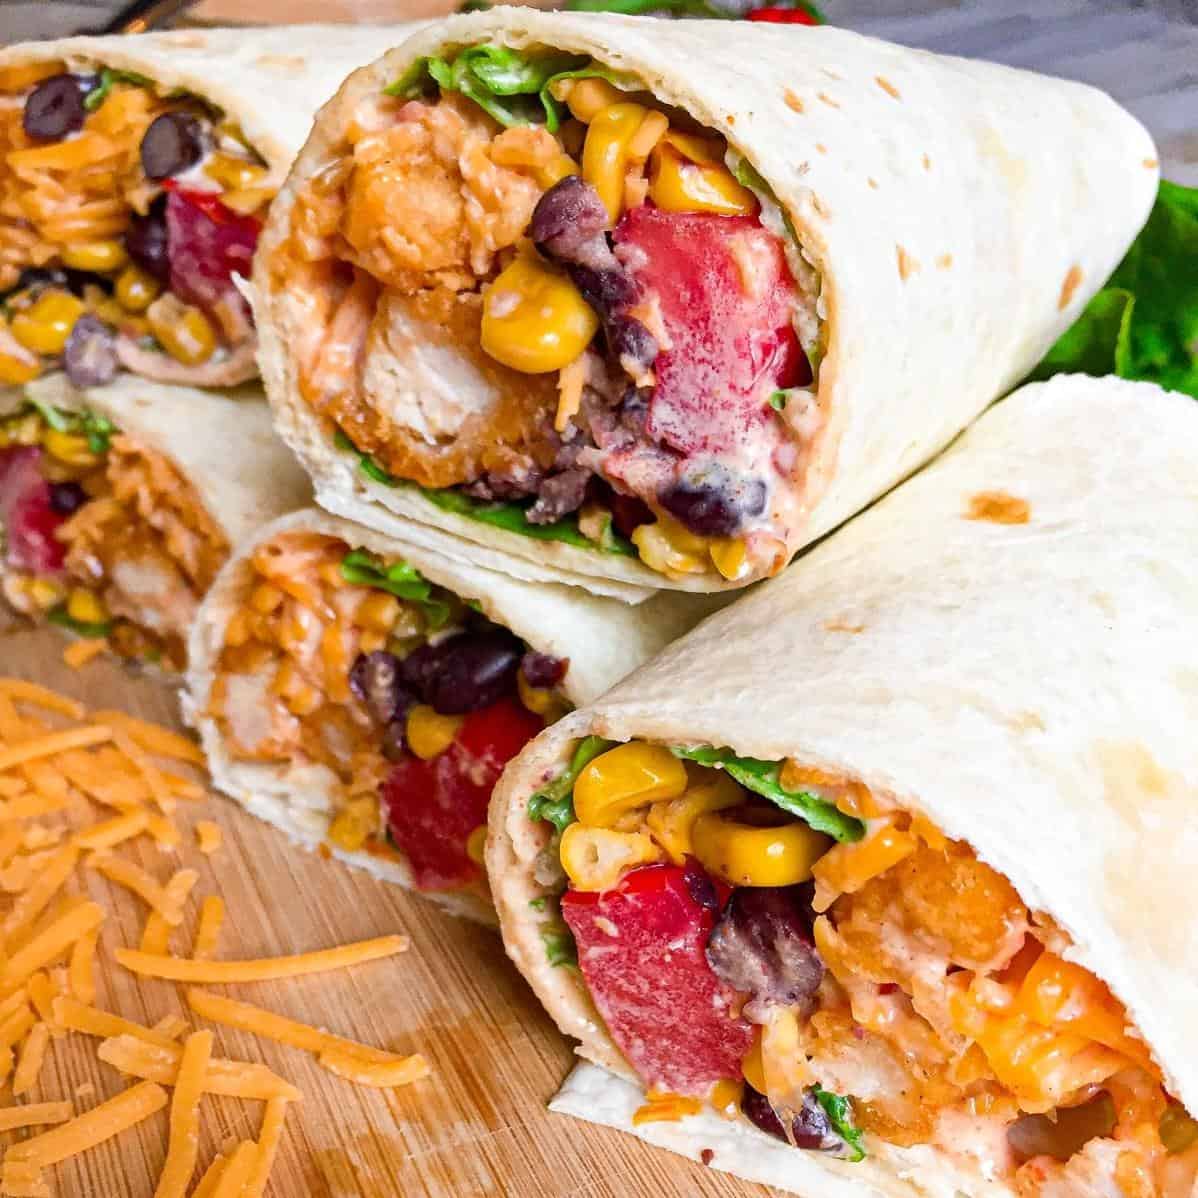  Add some color and flavor to your culinary repertoire with these Southwest tortilla wraps.